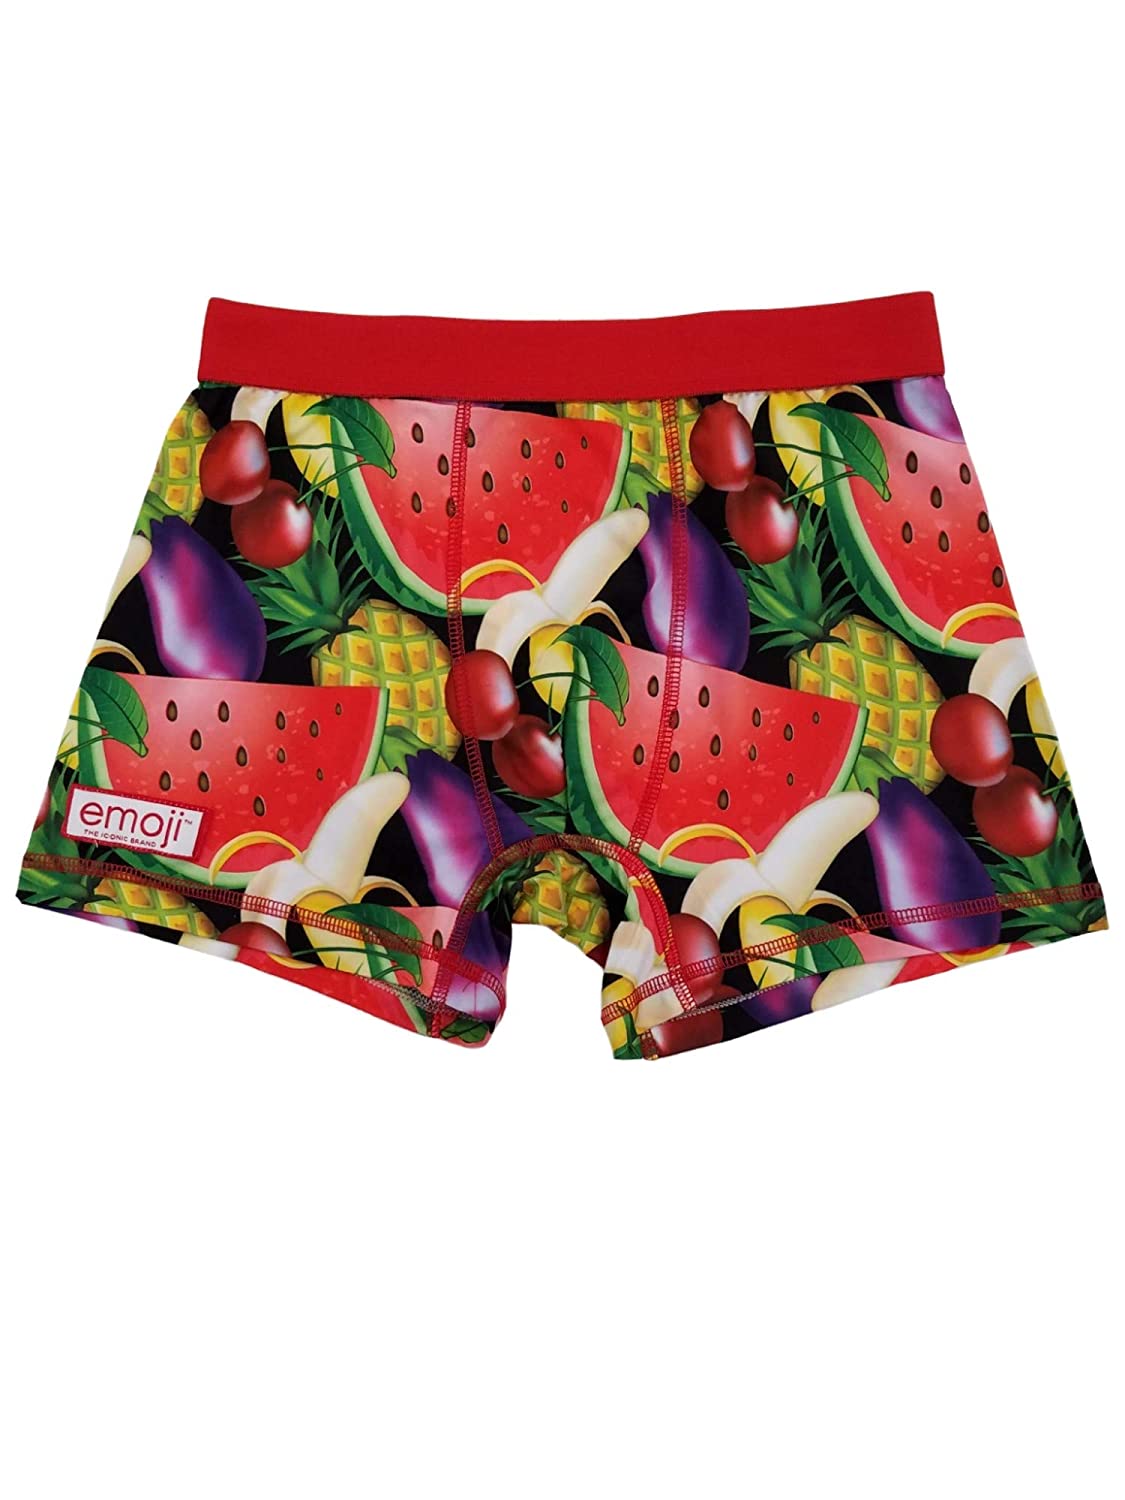 Men's Emoji Boxer Briefs Funny Fruit All Over Print Underwear – Rex  Distributor, Inc. Wholesale Licensed Products and T-shirts, Sporting goods